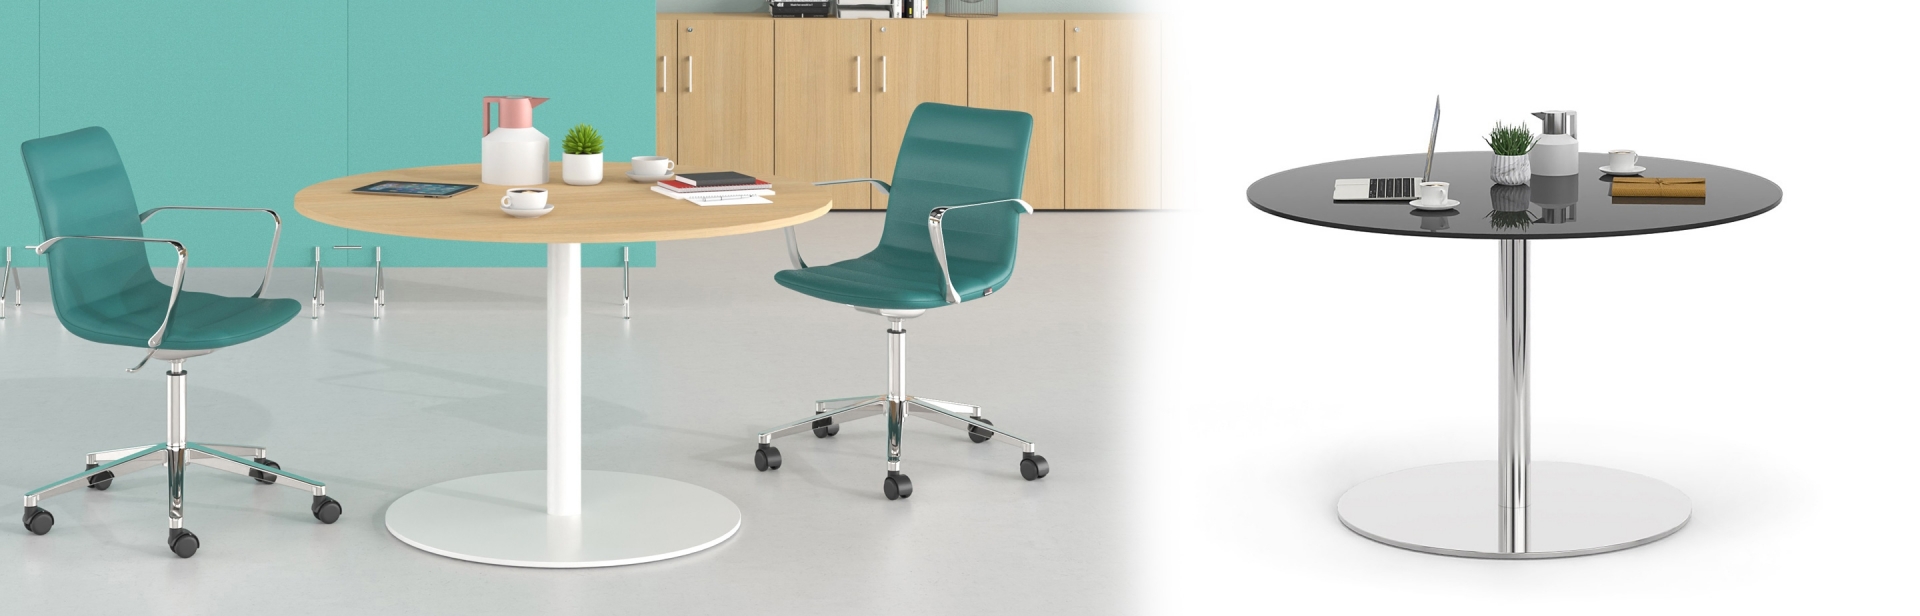 Auxiliary Tables and Round tables for Your Business Space | Runner